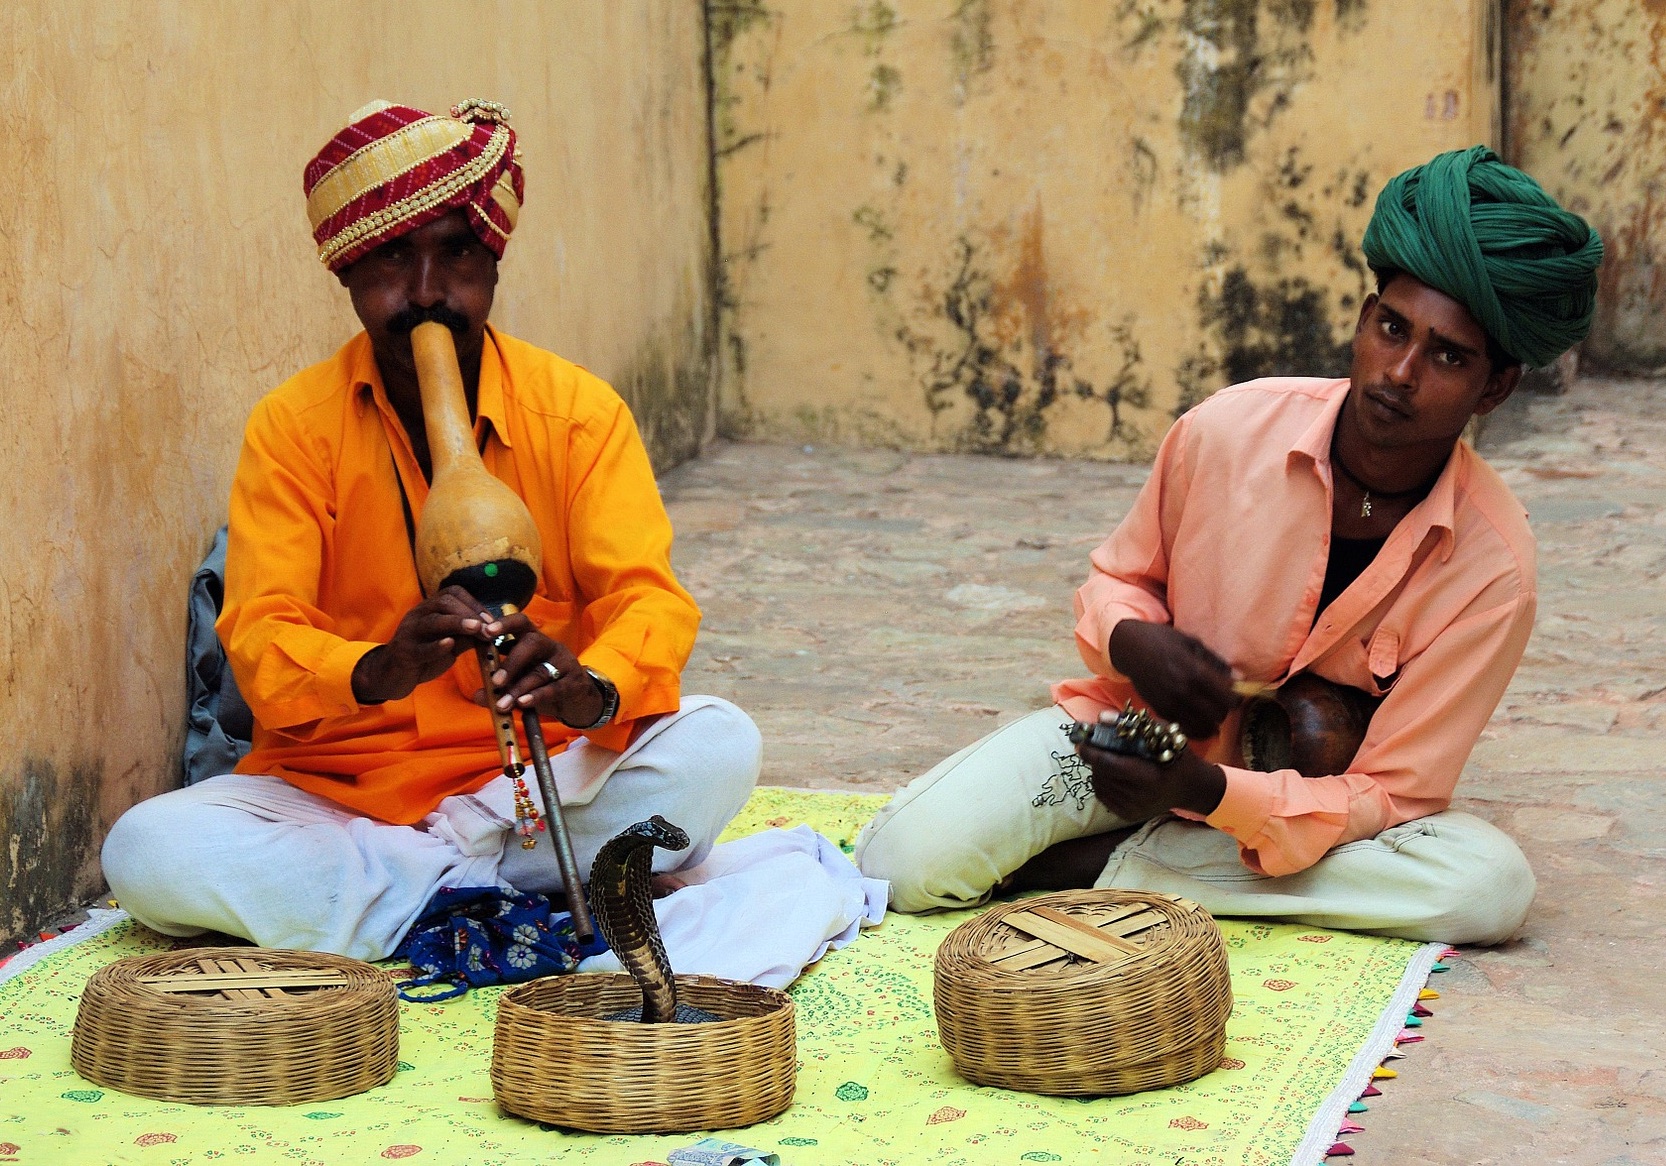 snake charmers and a snake